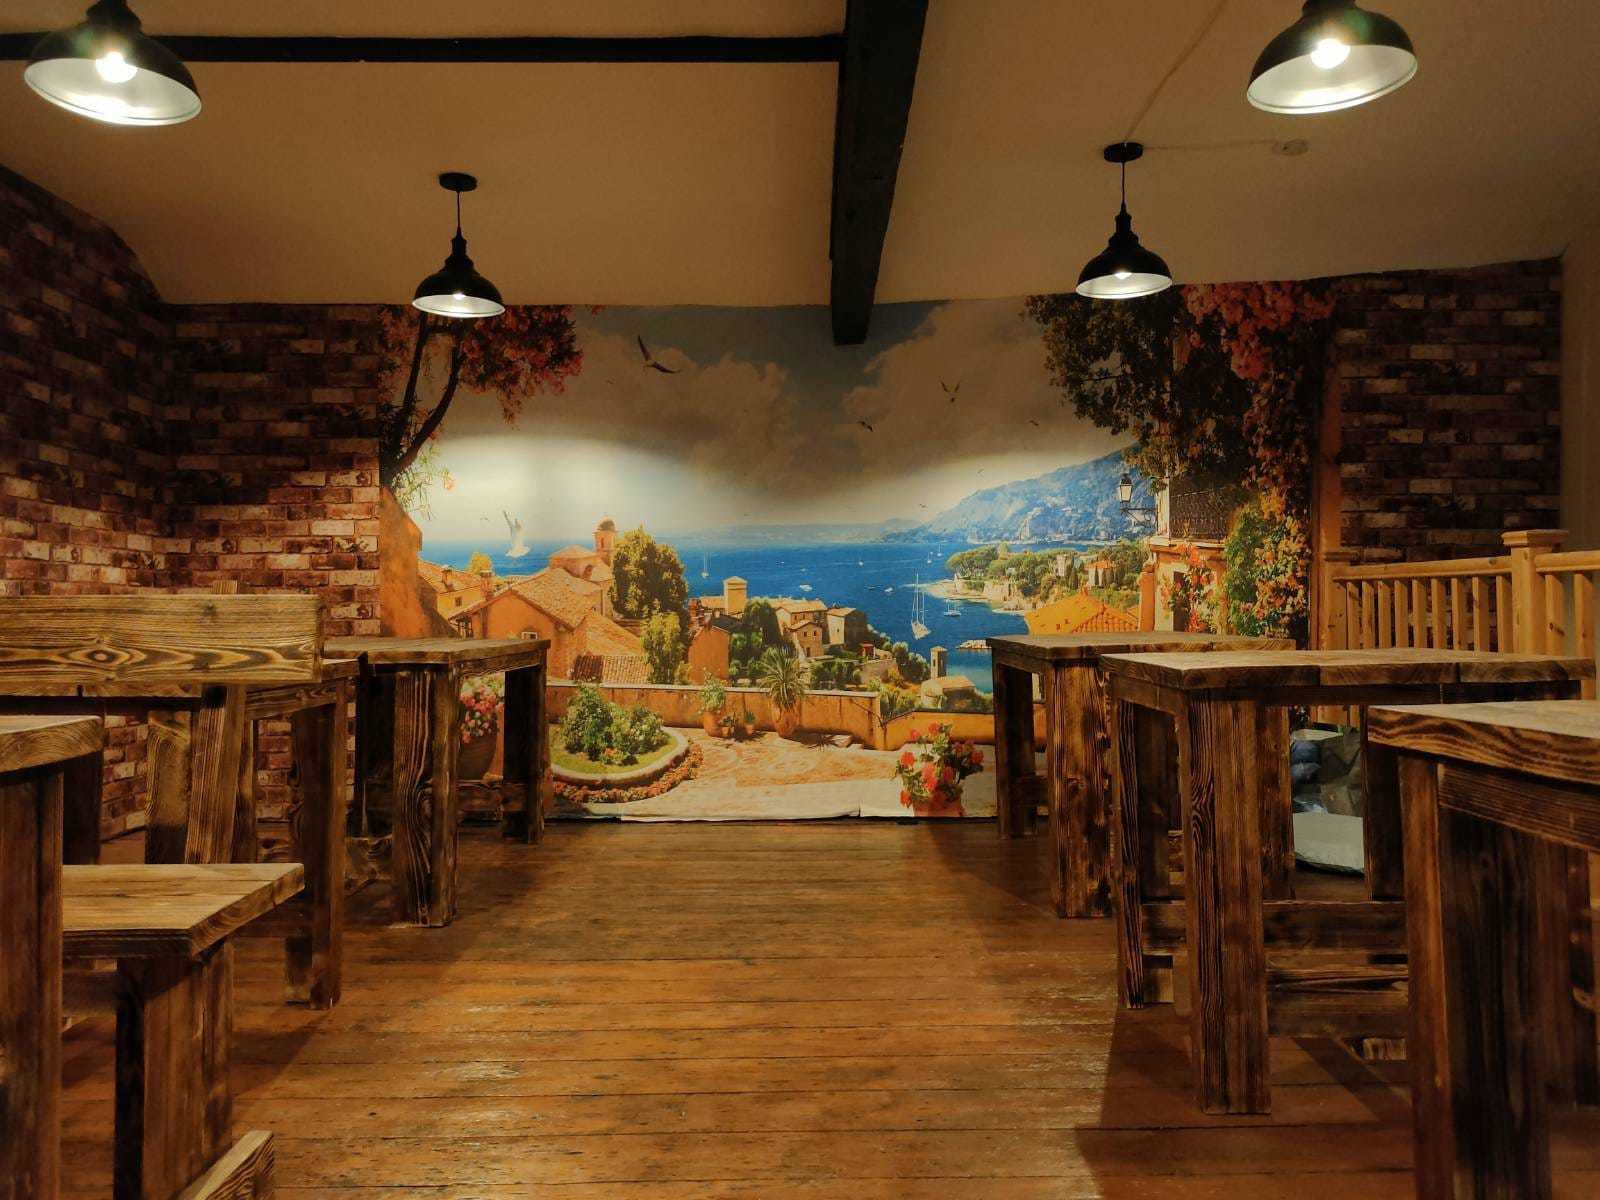 One wall of the restaurant features an Italian view